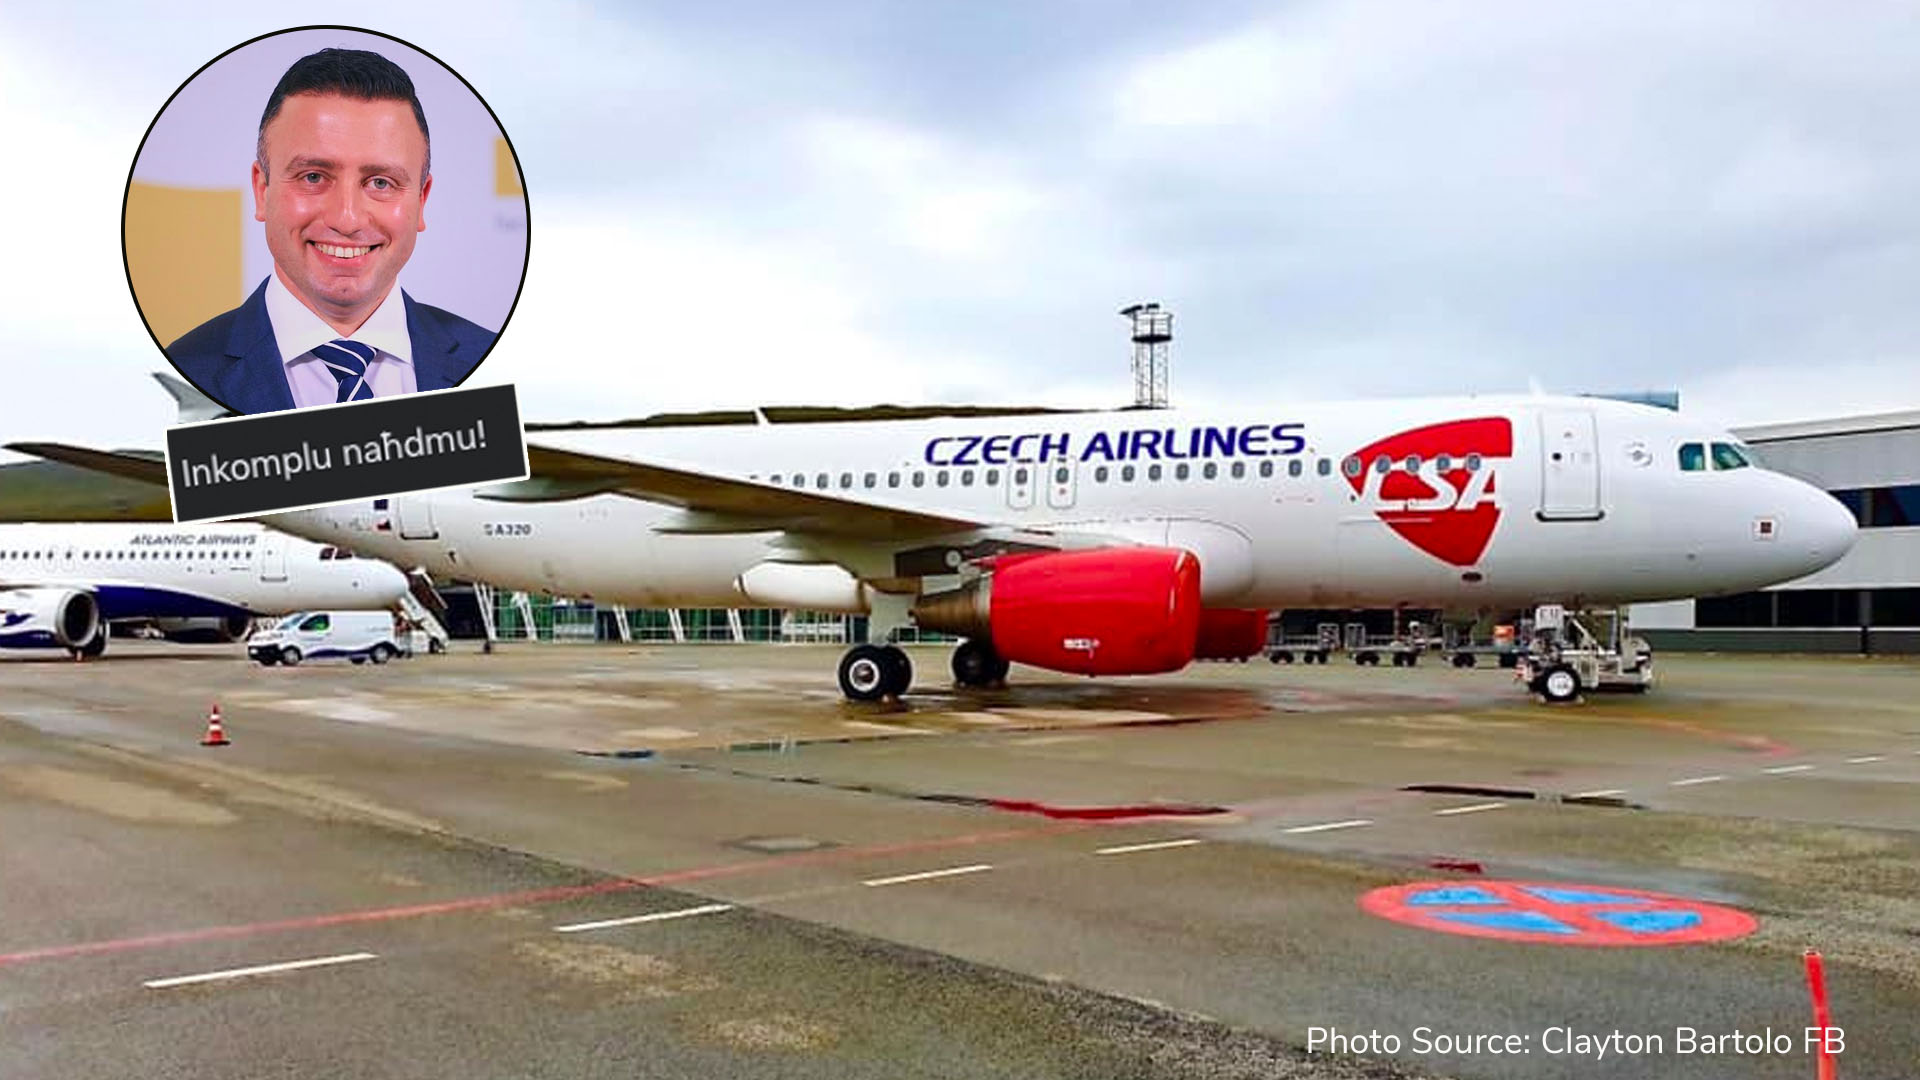 Clayton Bartolo announces Czech Airlines will be flying to and from Malta